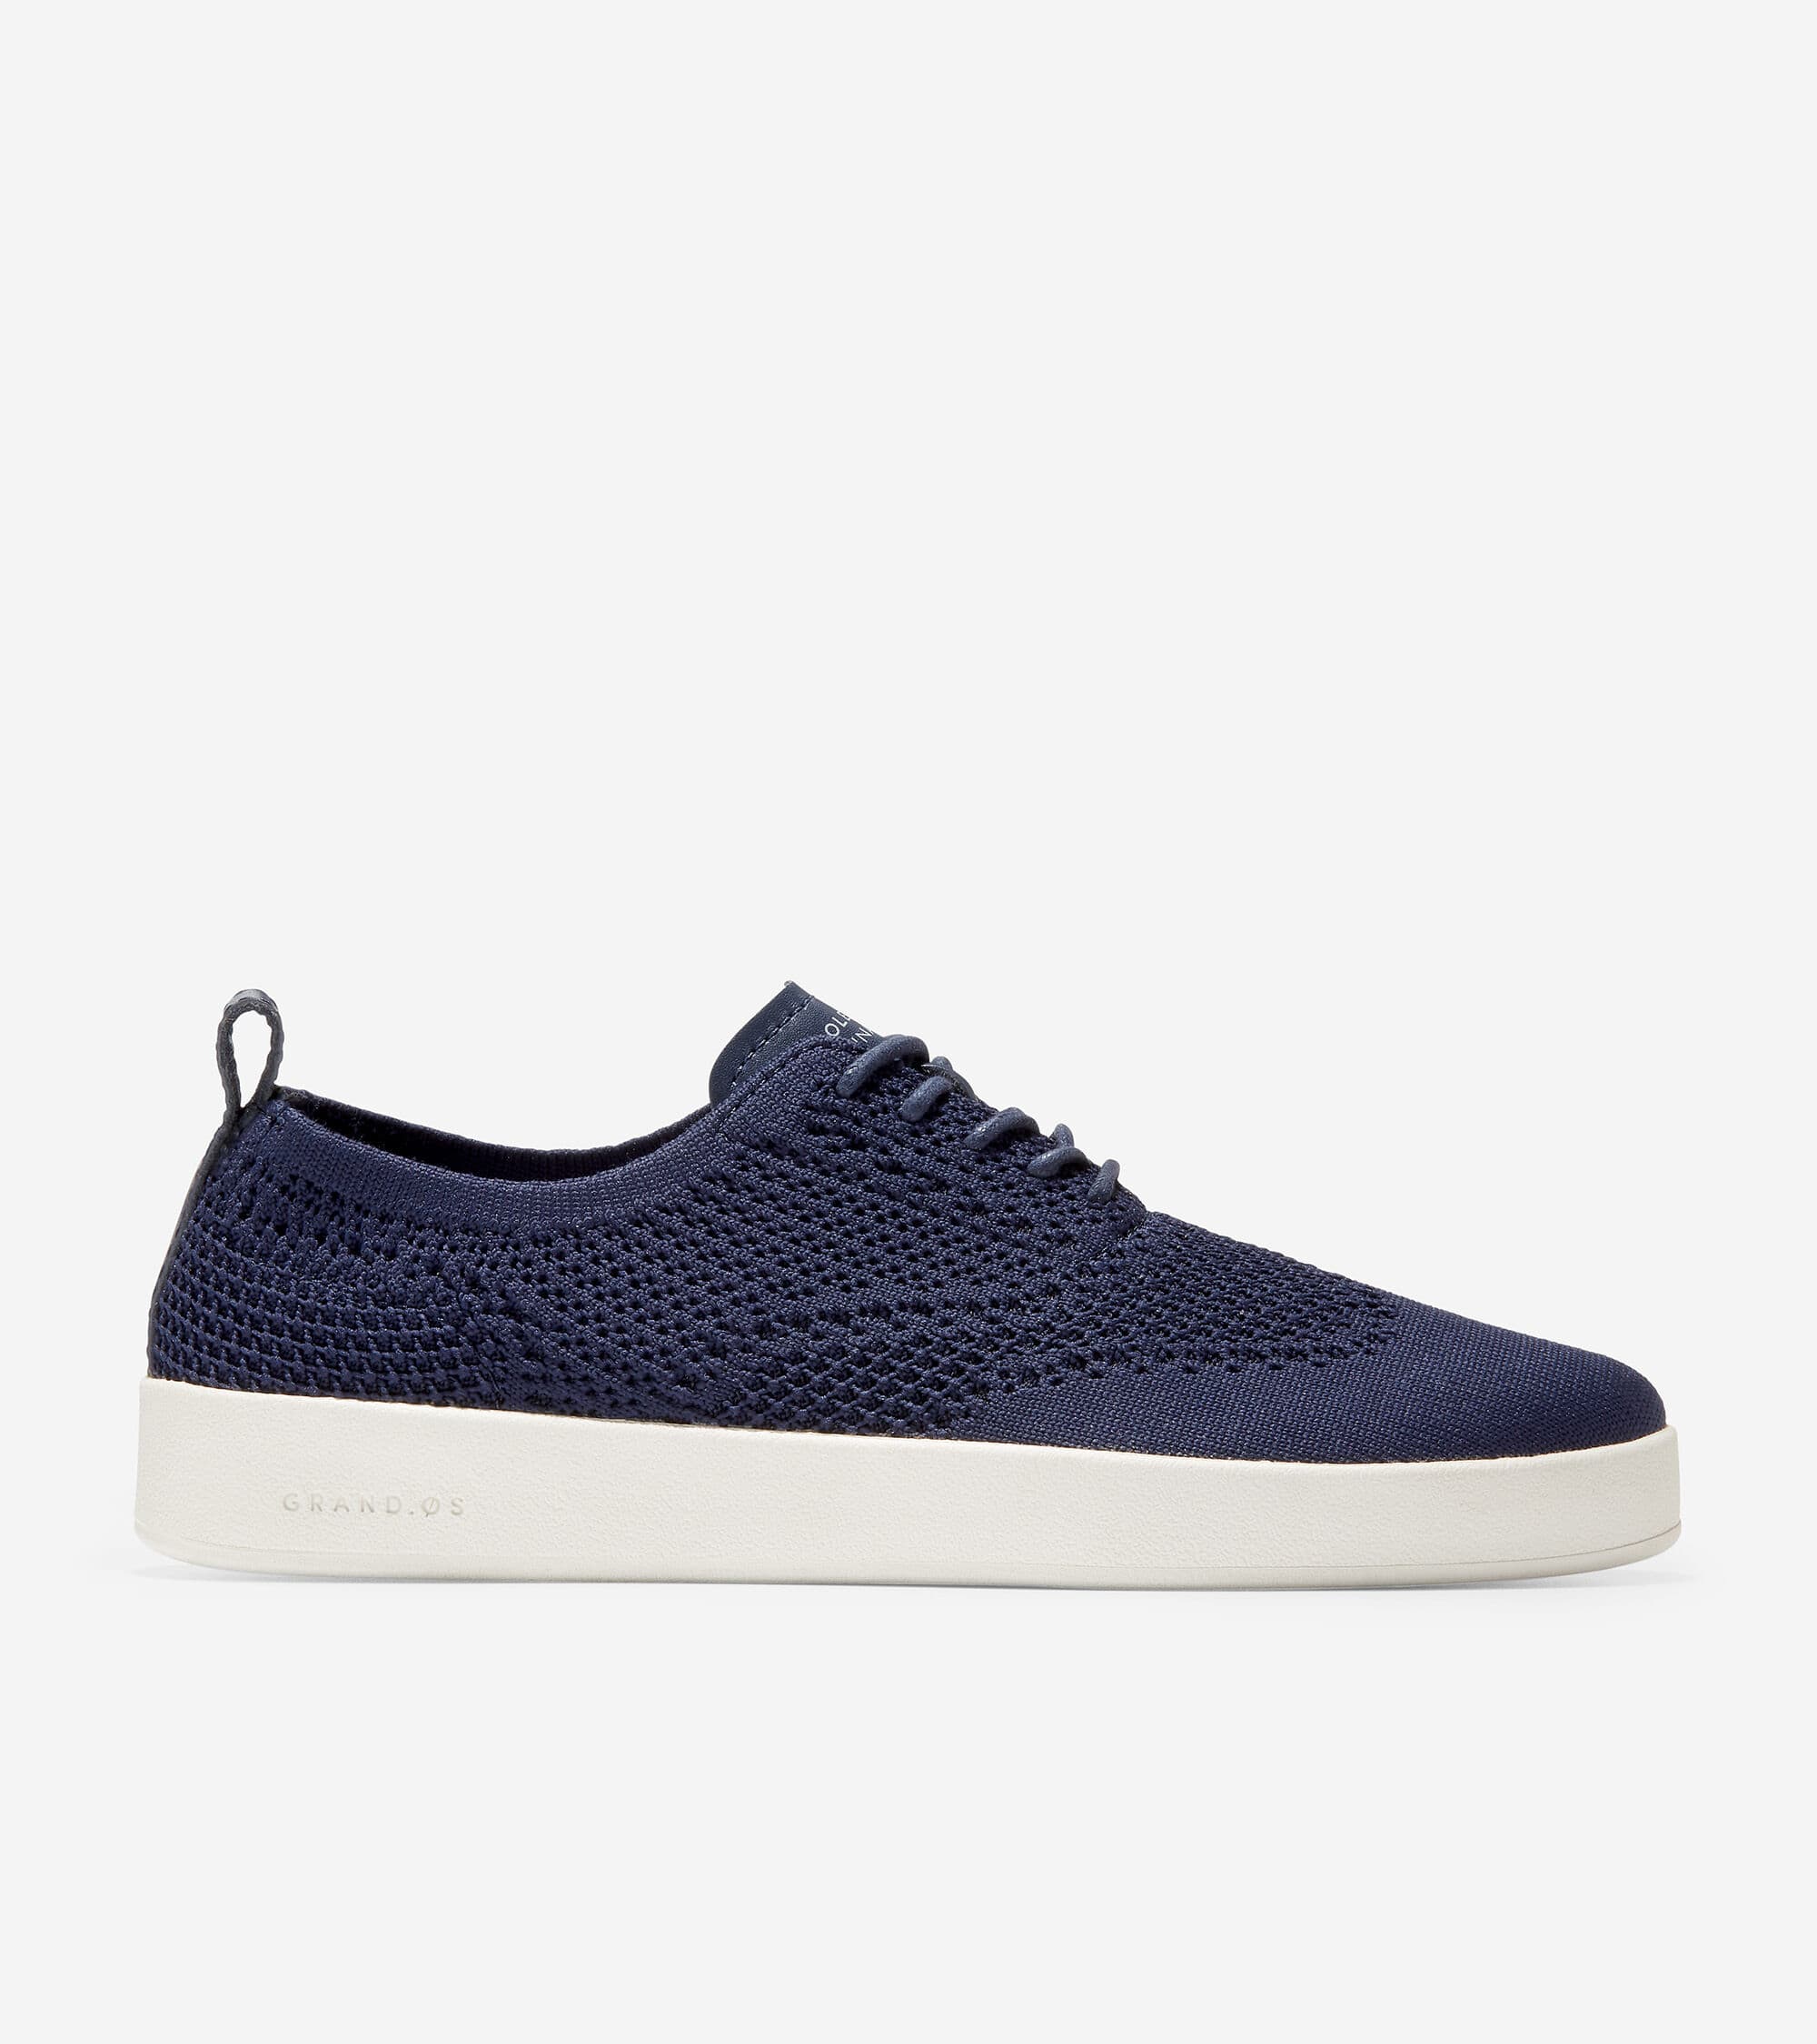 Cole Haan: Up to 50% Off Select Styles + Free Shipping $59.95